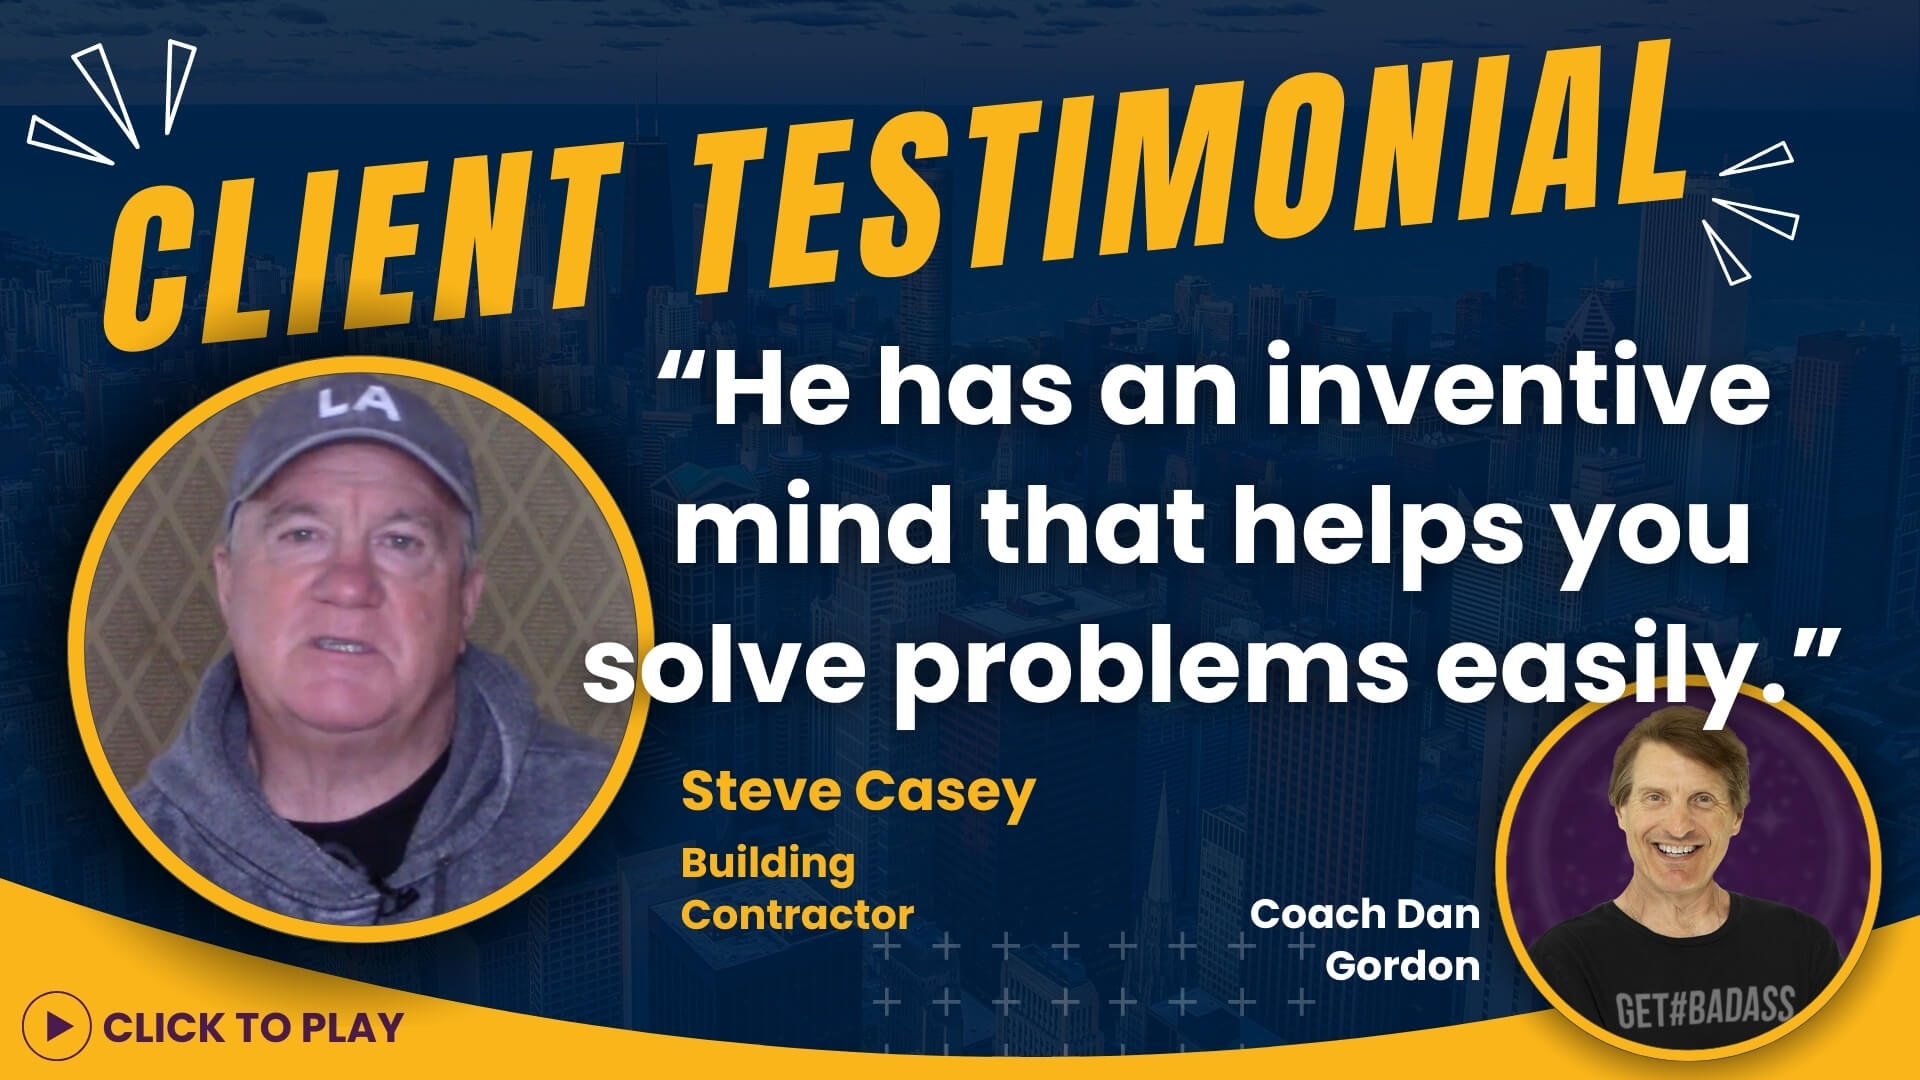 Steve Casey, Building Contractor, featured in a client testimonial for Coach Dan Gordon, lauding his problem-solving skills.